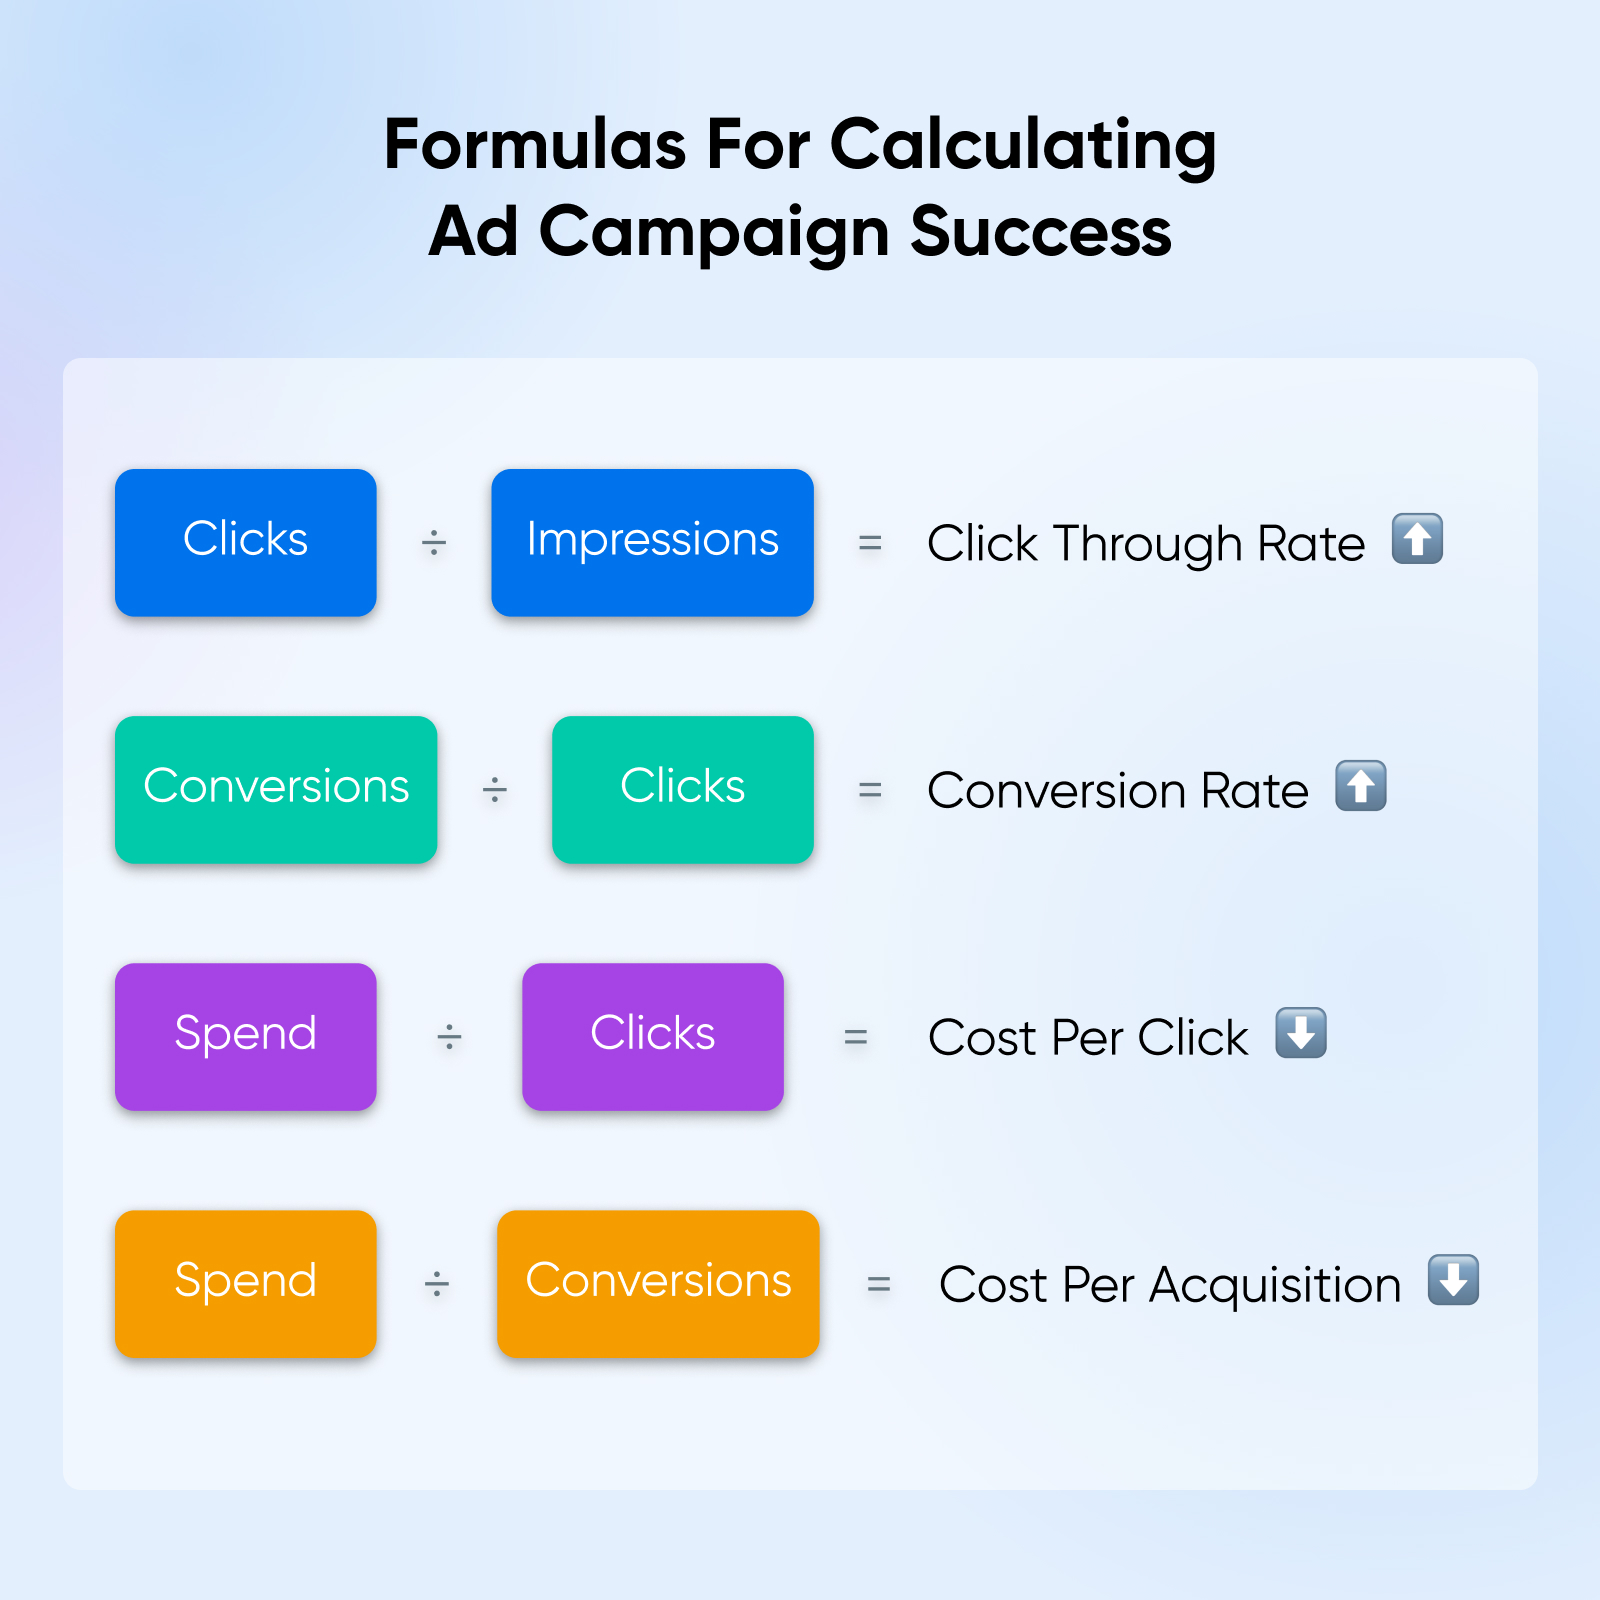 Formulas for calculating ad campaign success appear in colorful boxes against a light blue background